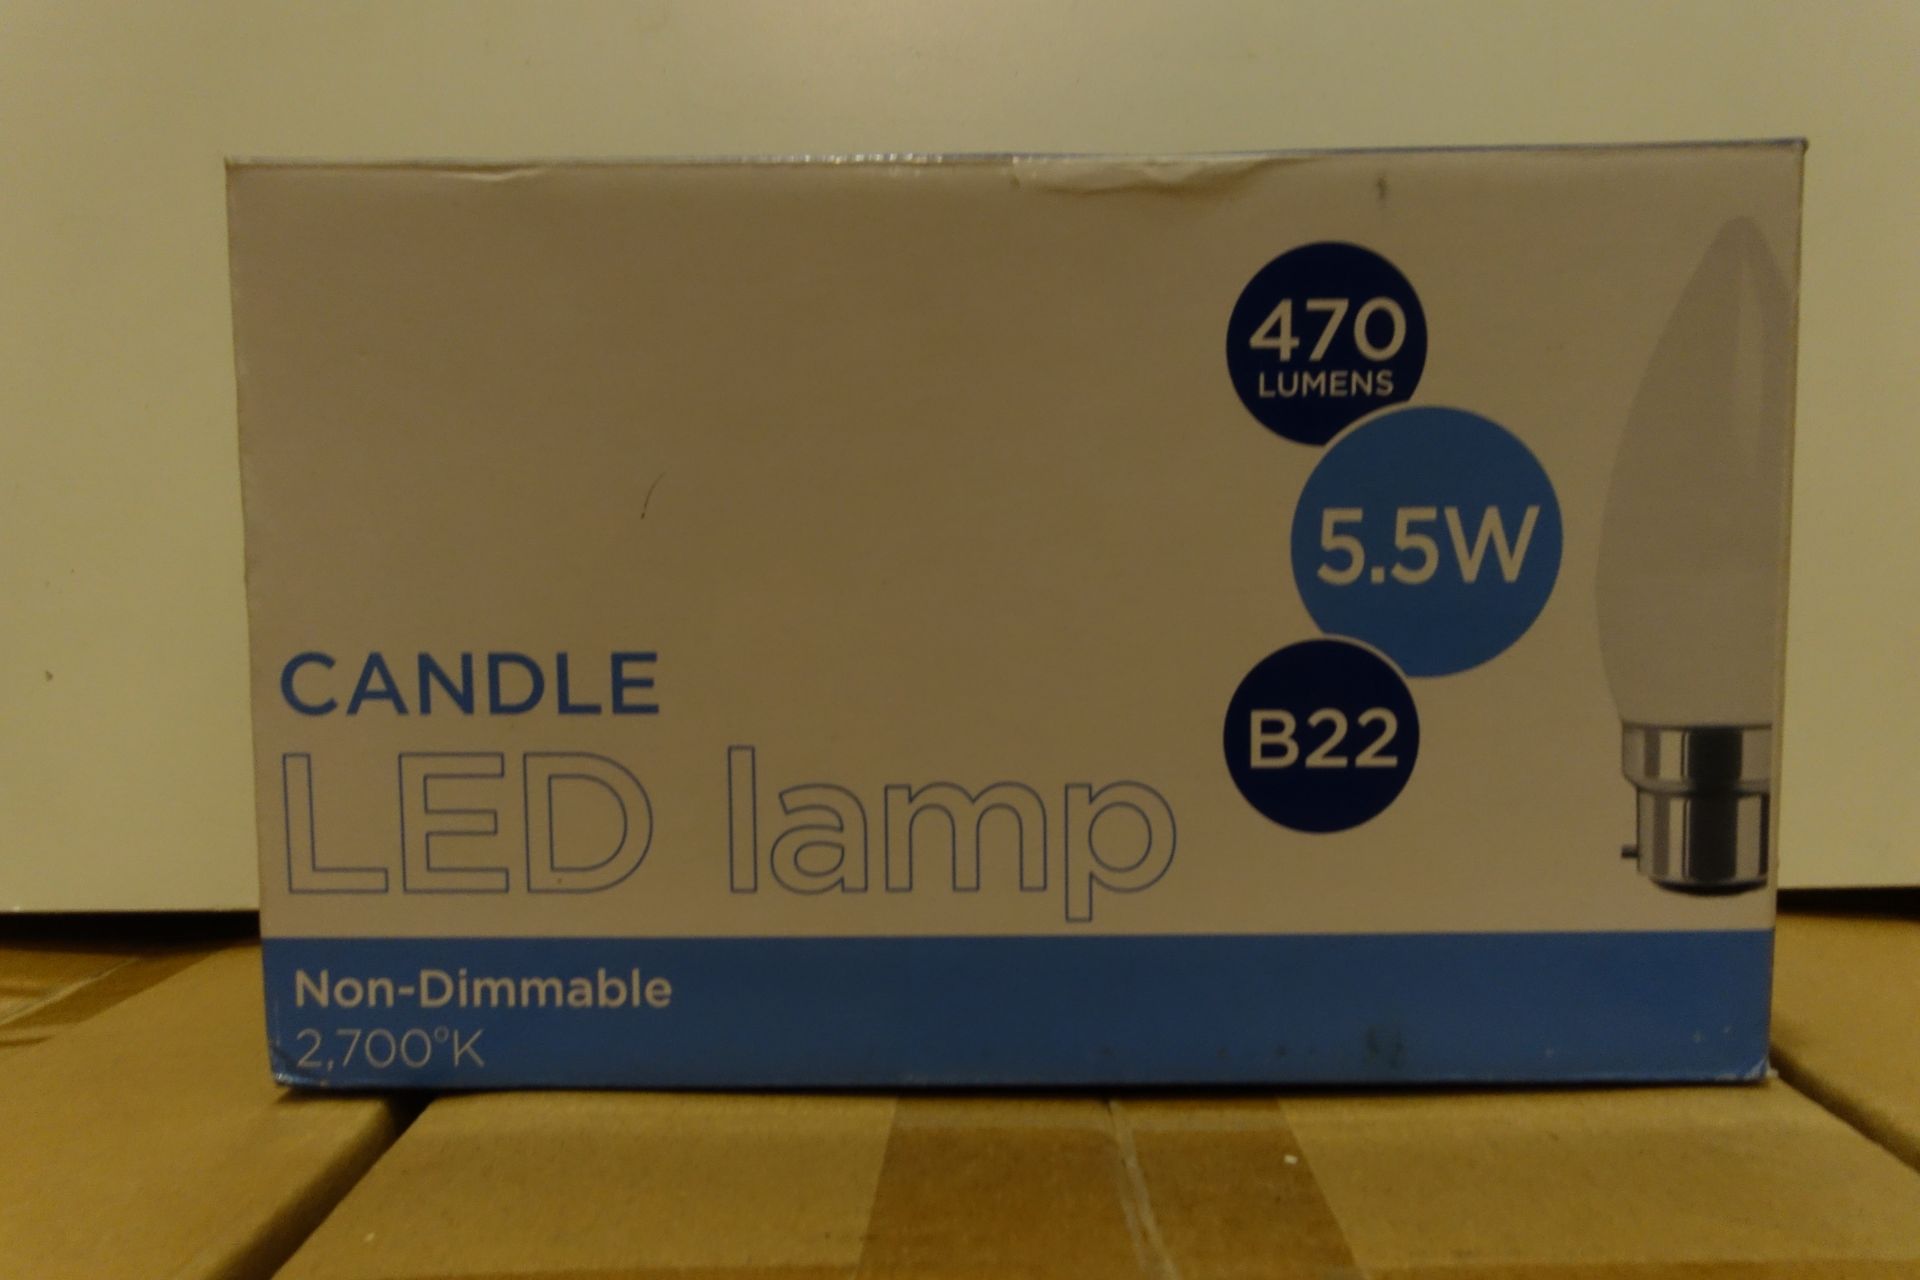 150 x LED Lamp NLLED/5.5/CAND/88=27/B22 5.5W LED Candle Lamps B22 Fitting